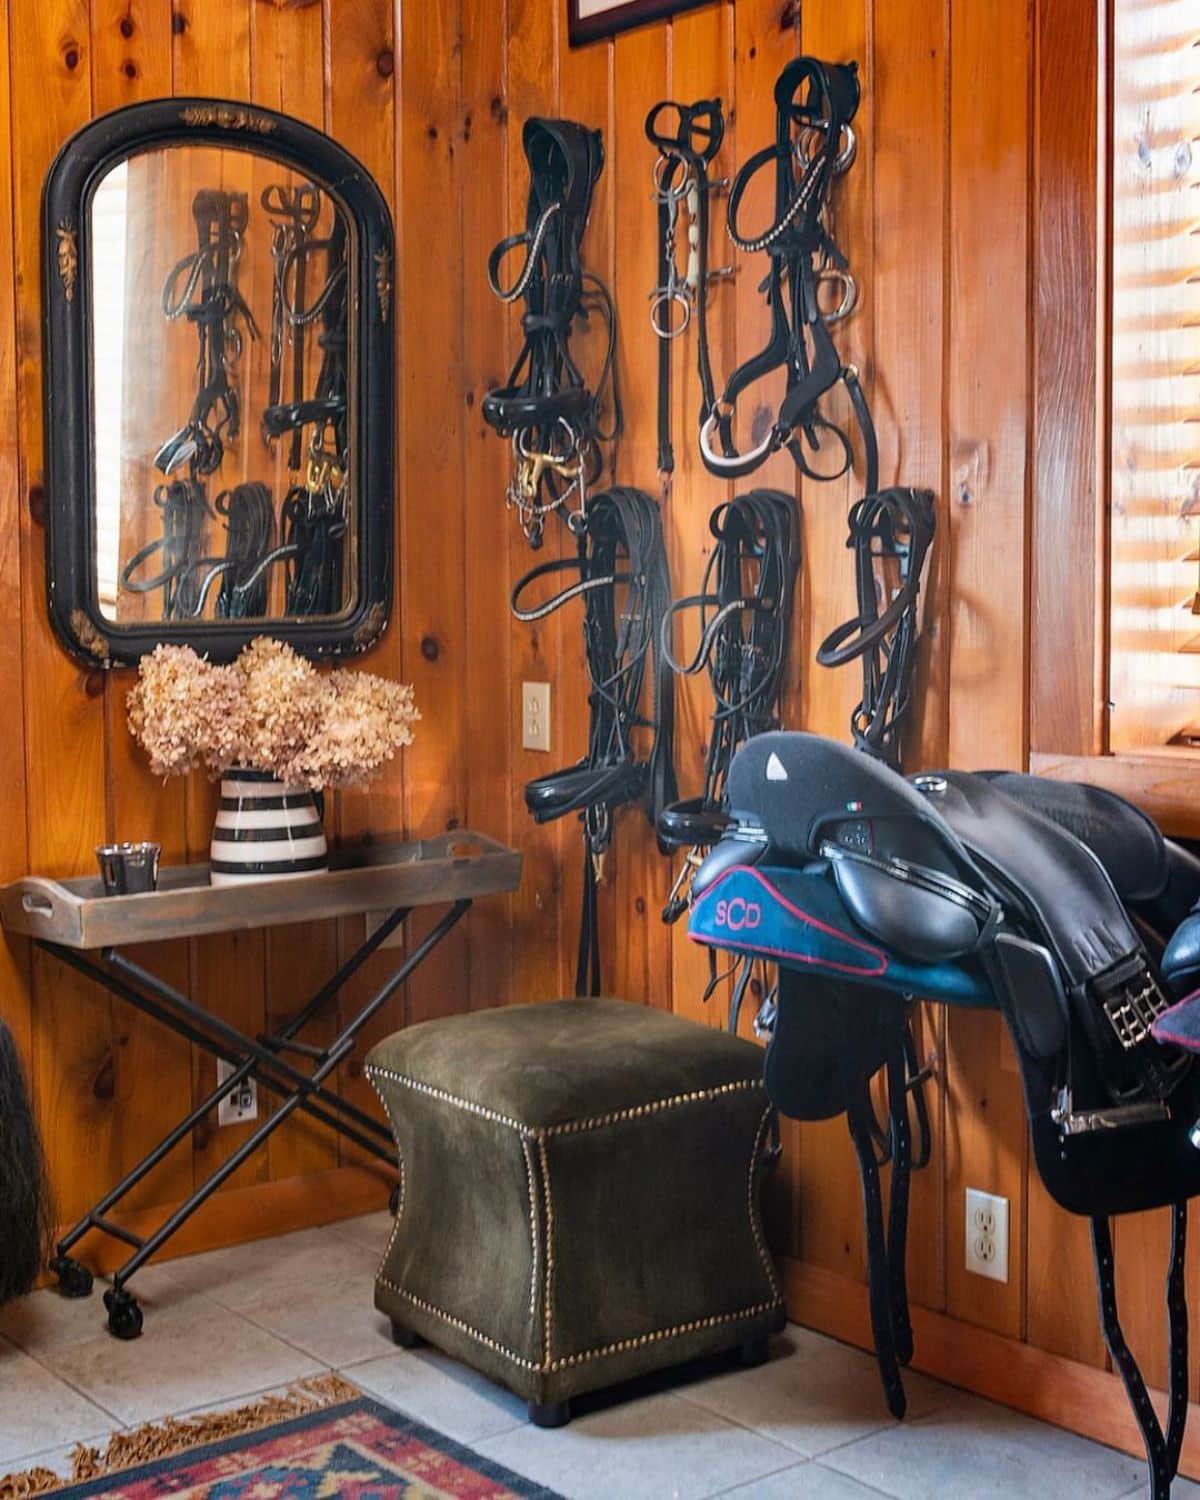 A rustic tack room with horse accessories hanging on a wall.